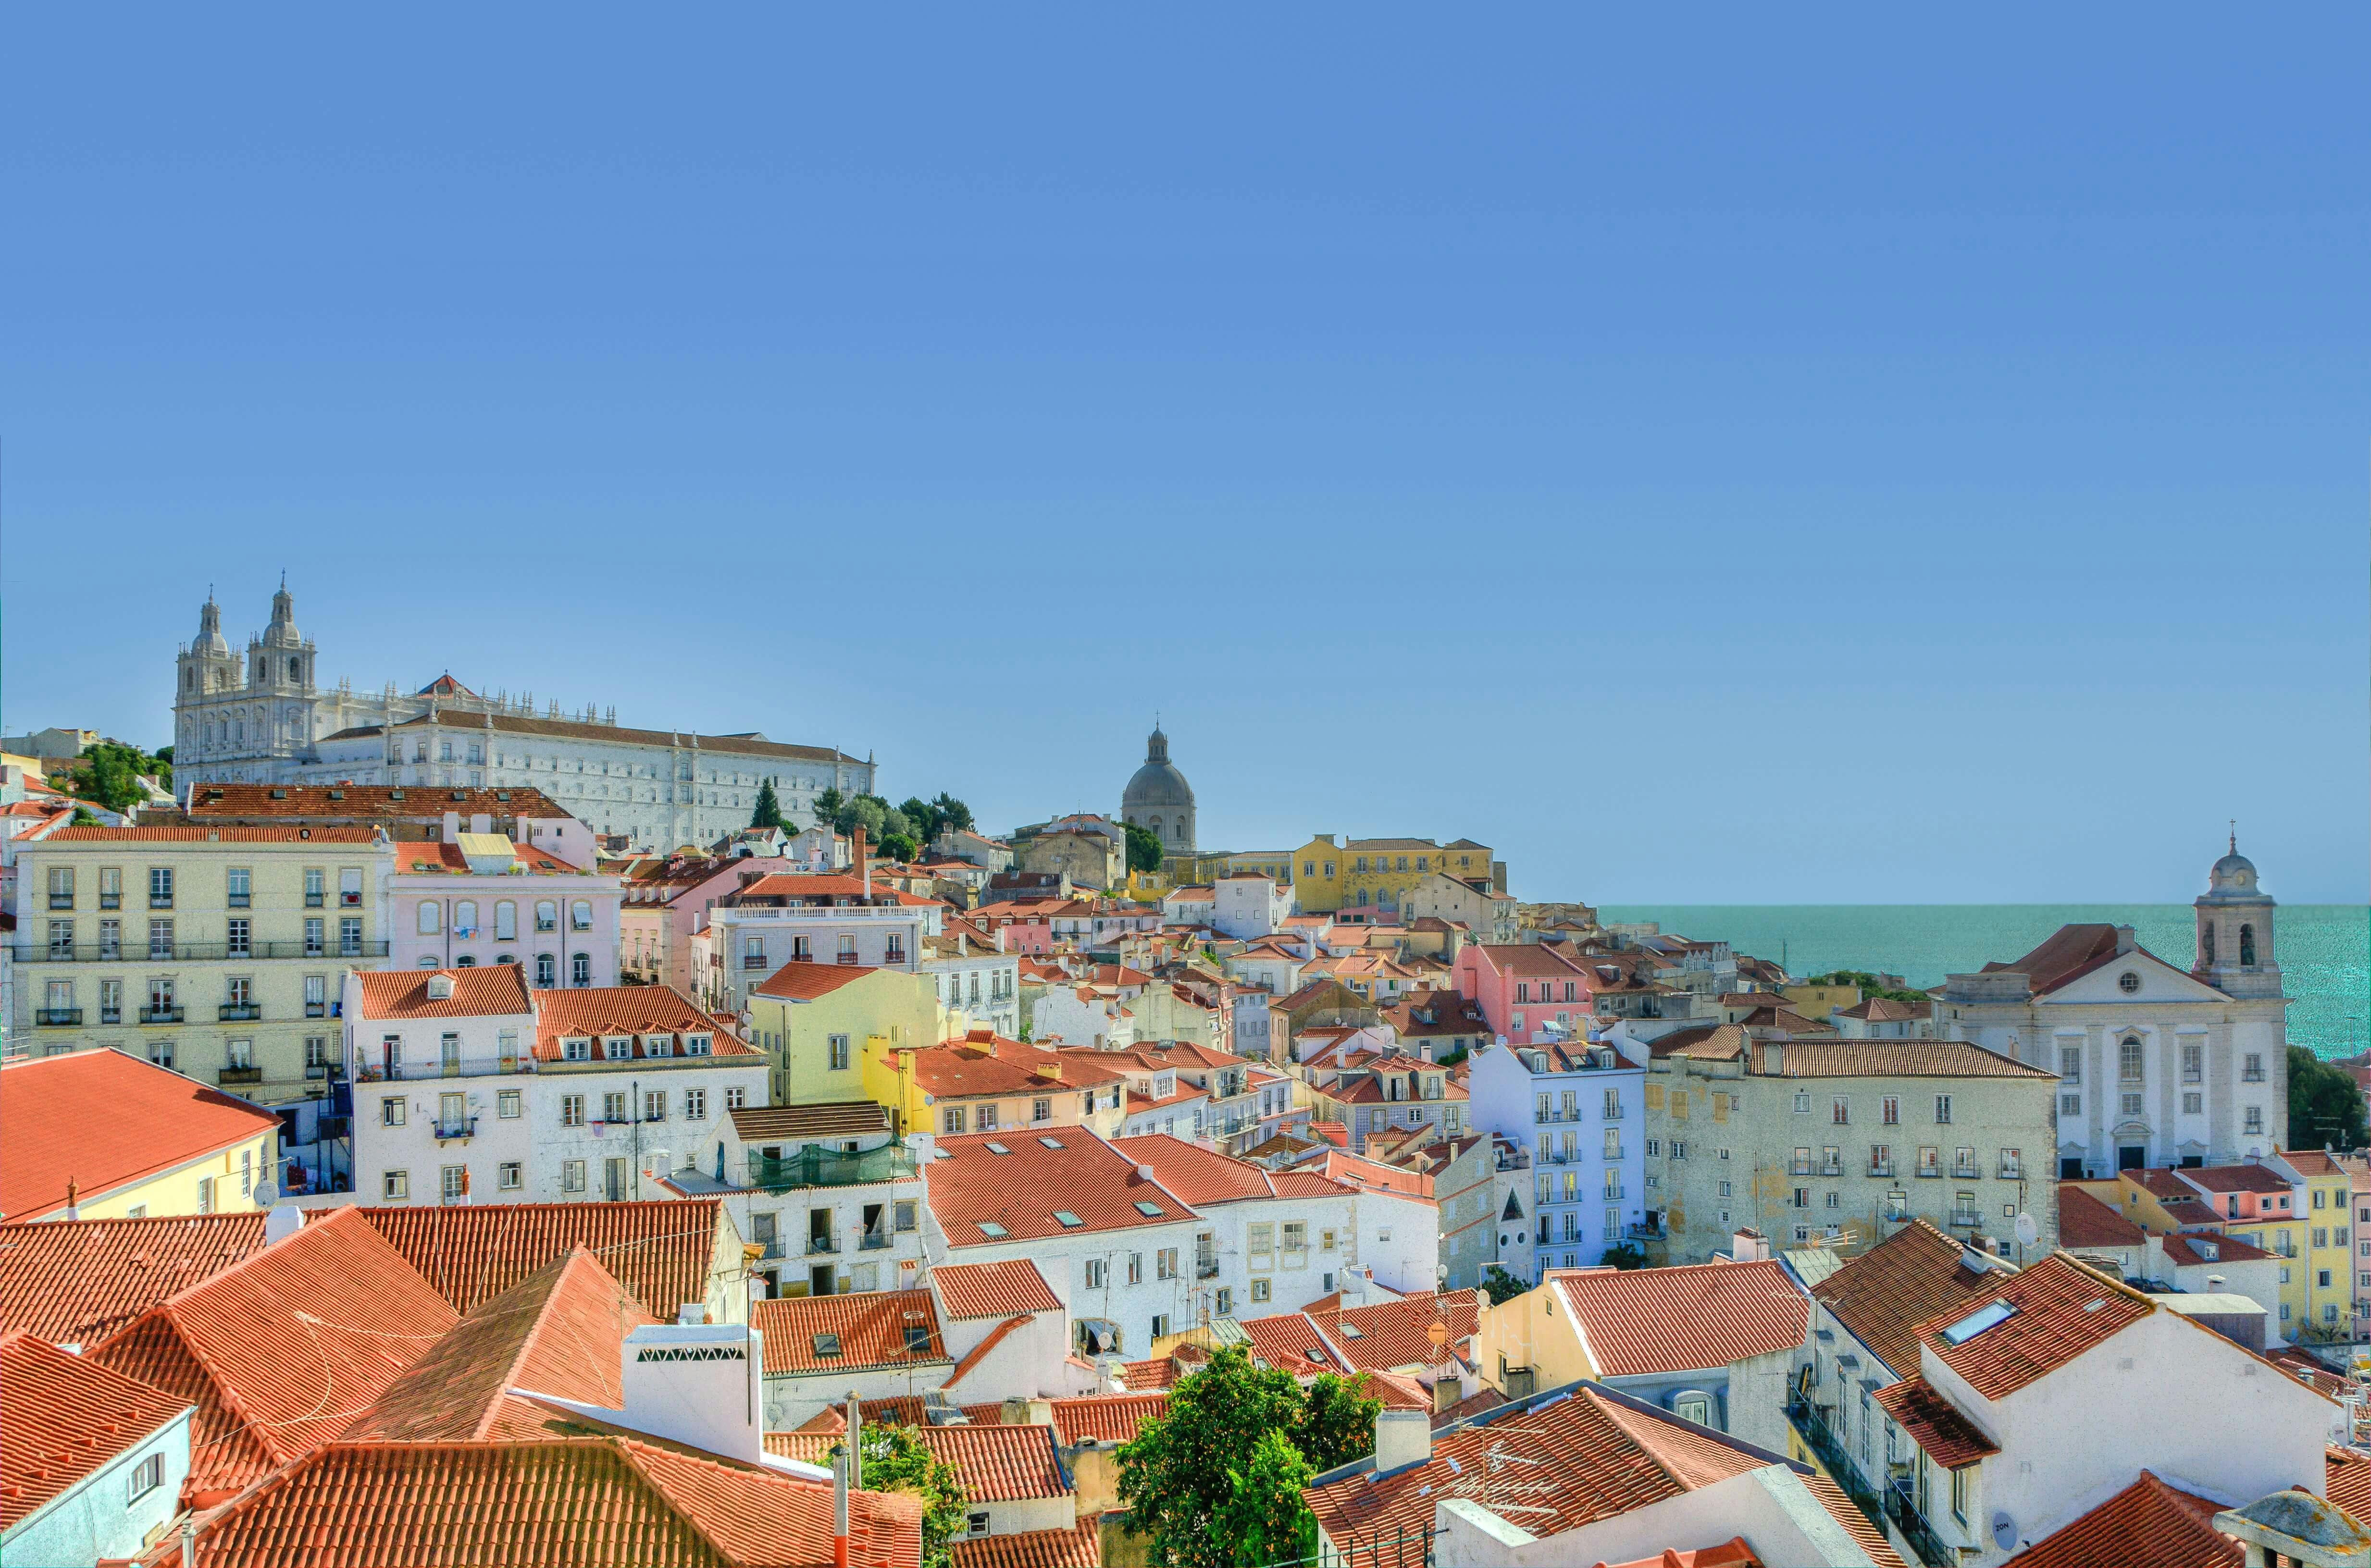 Panoramic view of Lisbon from the Sé neighborhood, showcasing the city's terracotta rooftops and Tagus River.